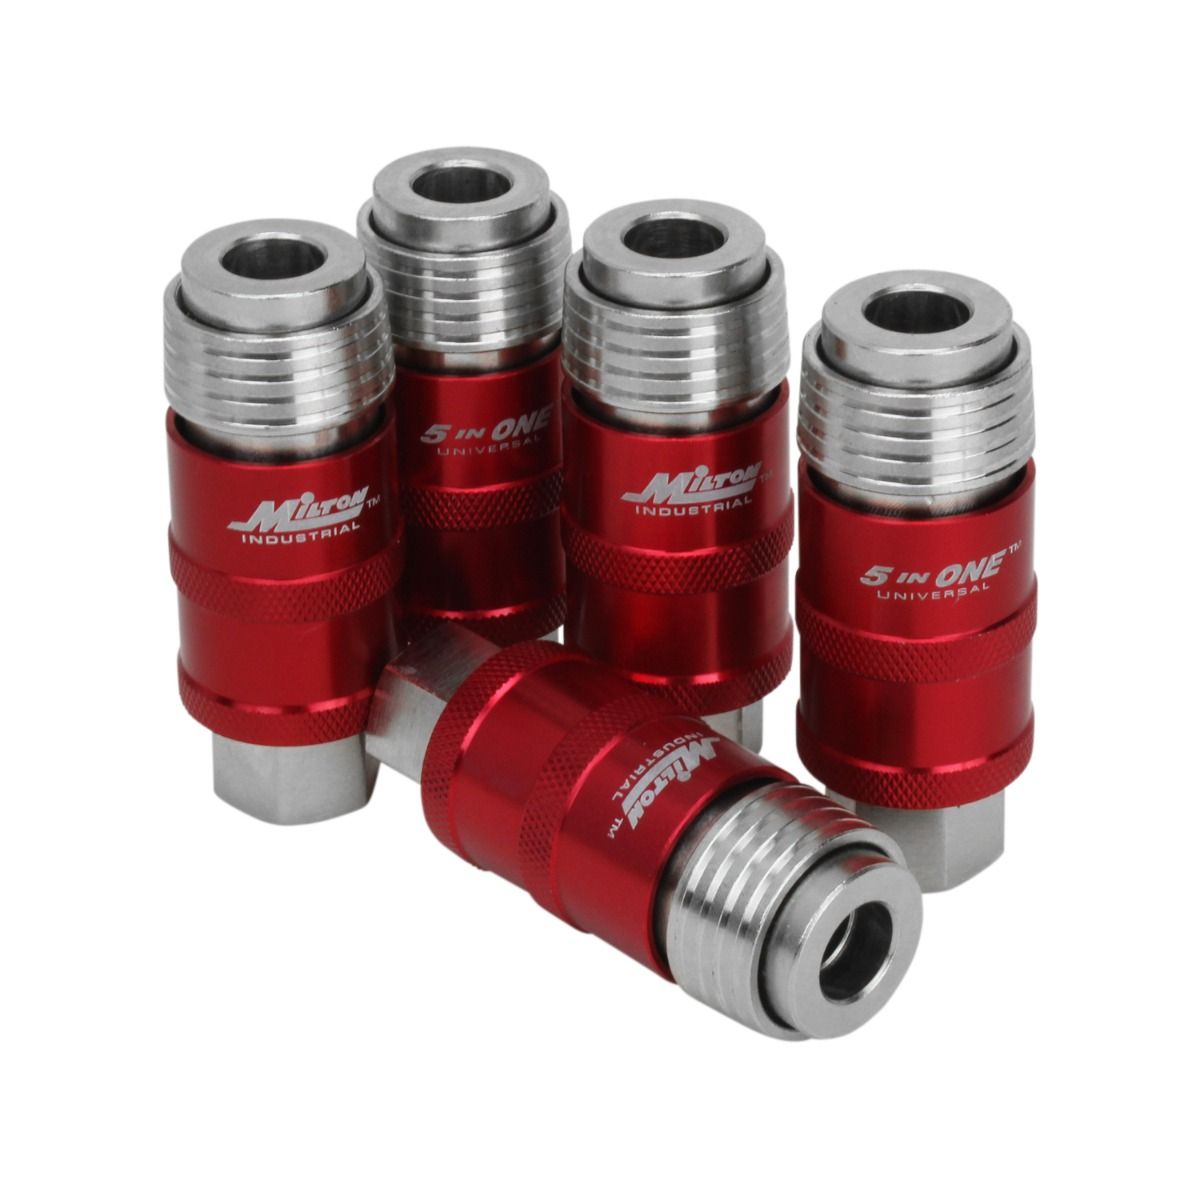 Milton 1750 5 In ONE Universal Safety Exhaust Quick-Connect Coupler 1/4" Female NPT - Pack of 5